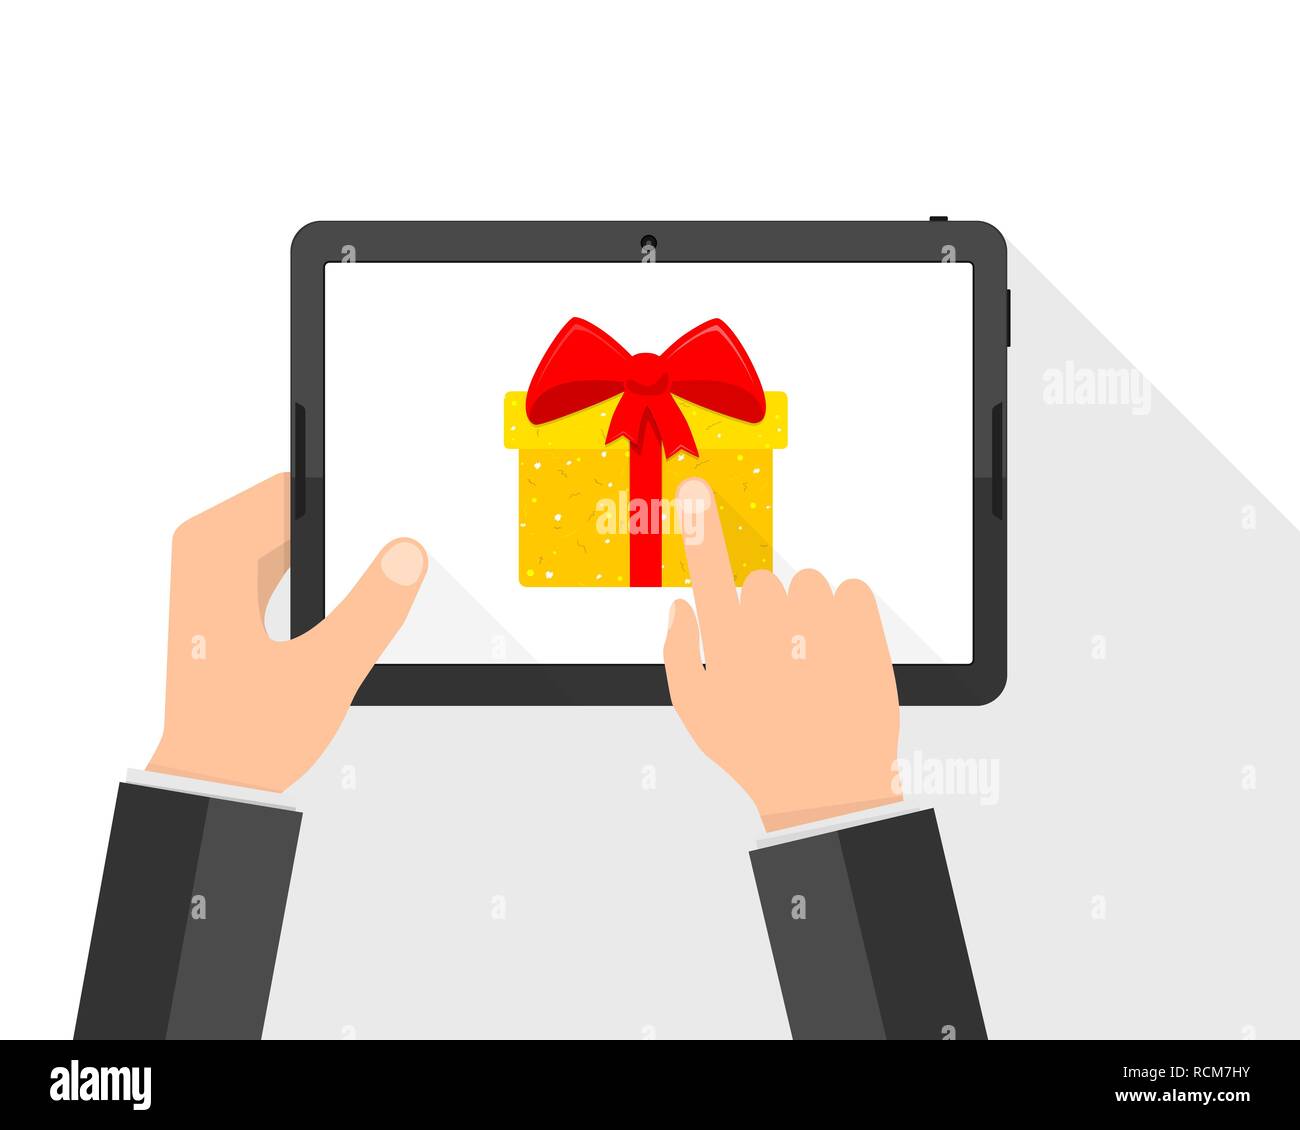 Hands of businessman with tablet and gift box on the screen. Vector illustration. Celebration concept Stock Vector